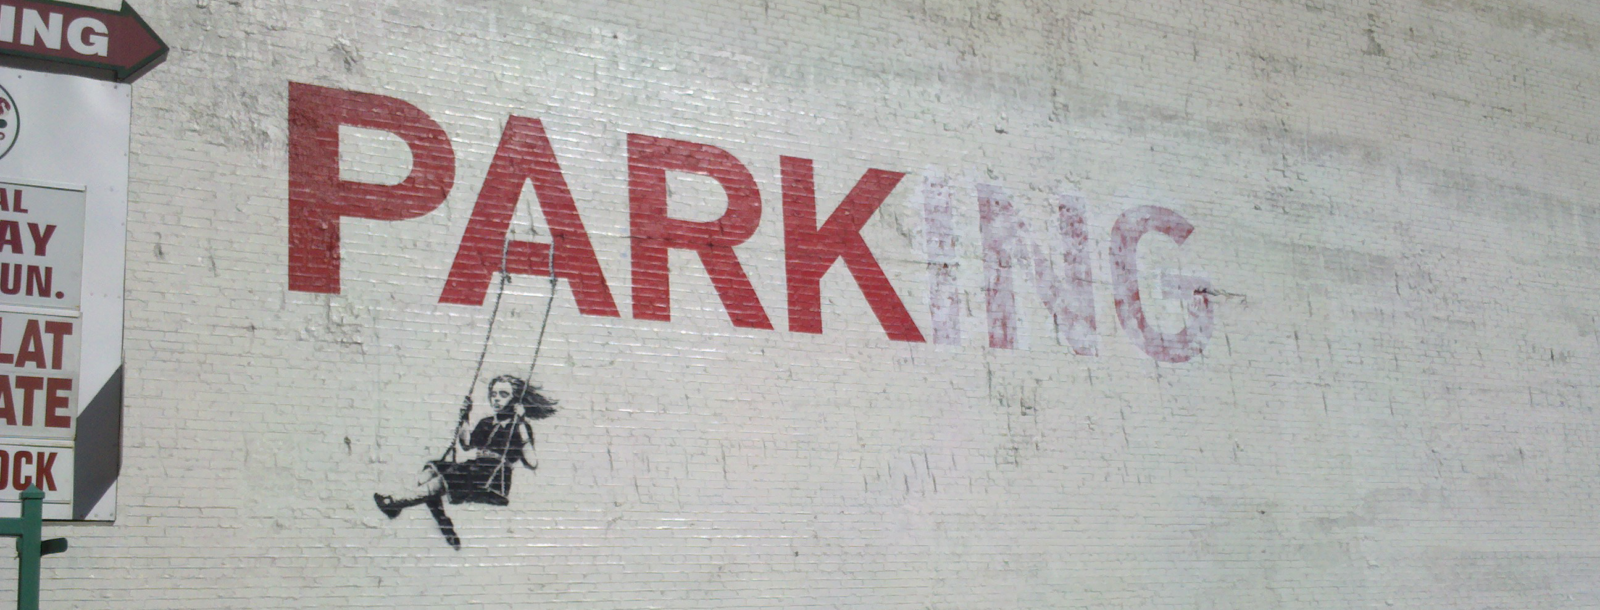 Banksy modified a parking sign painted on a wall to say "park" and drew a girl on a swing hanging from the letter A.